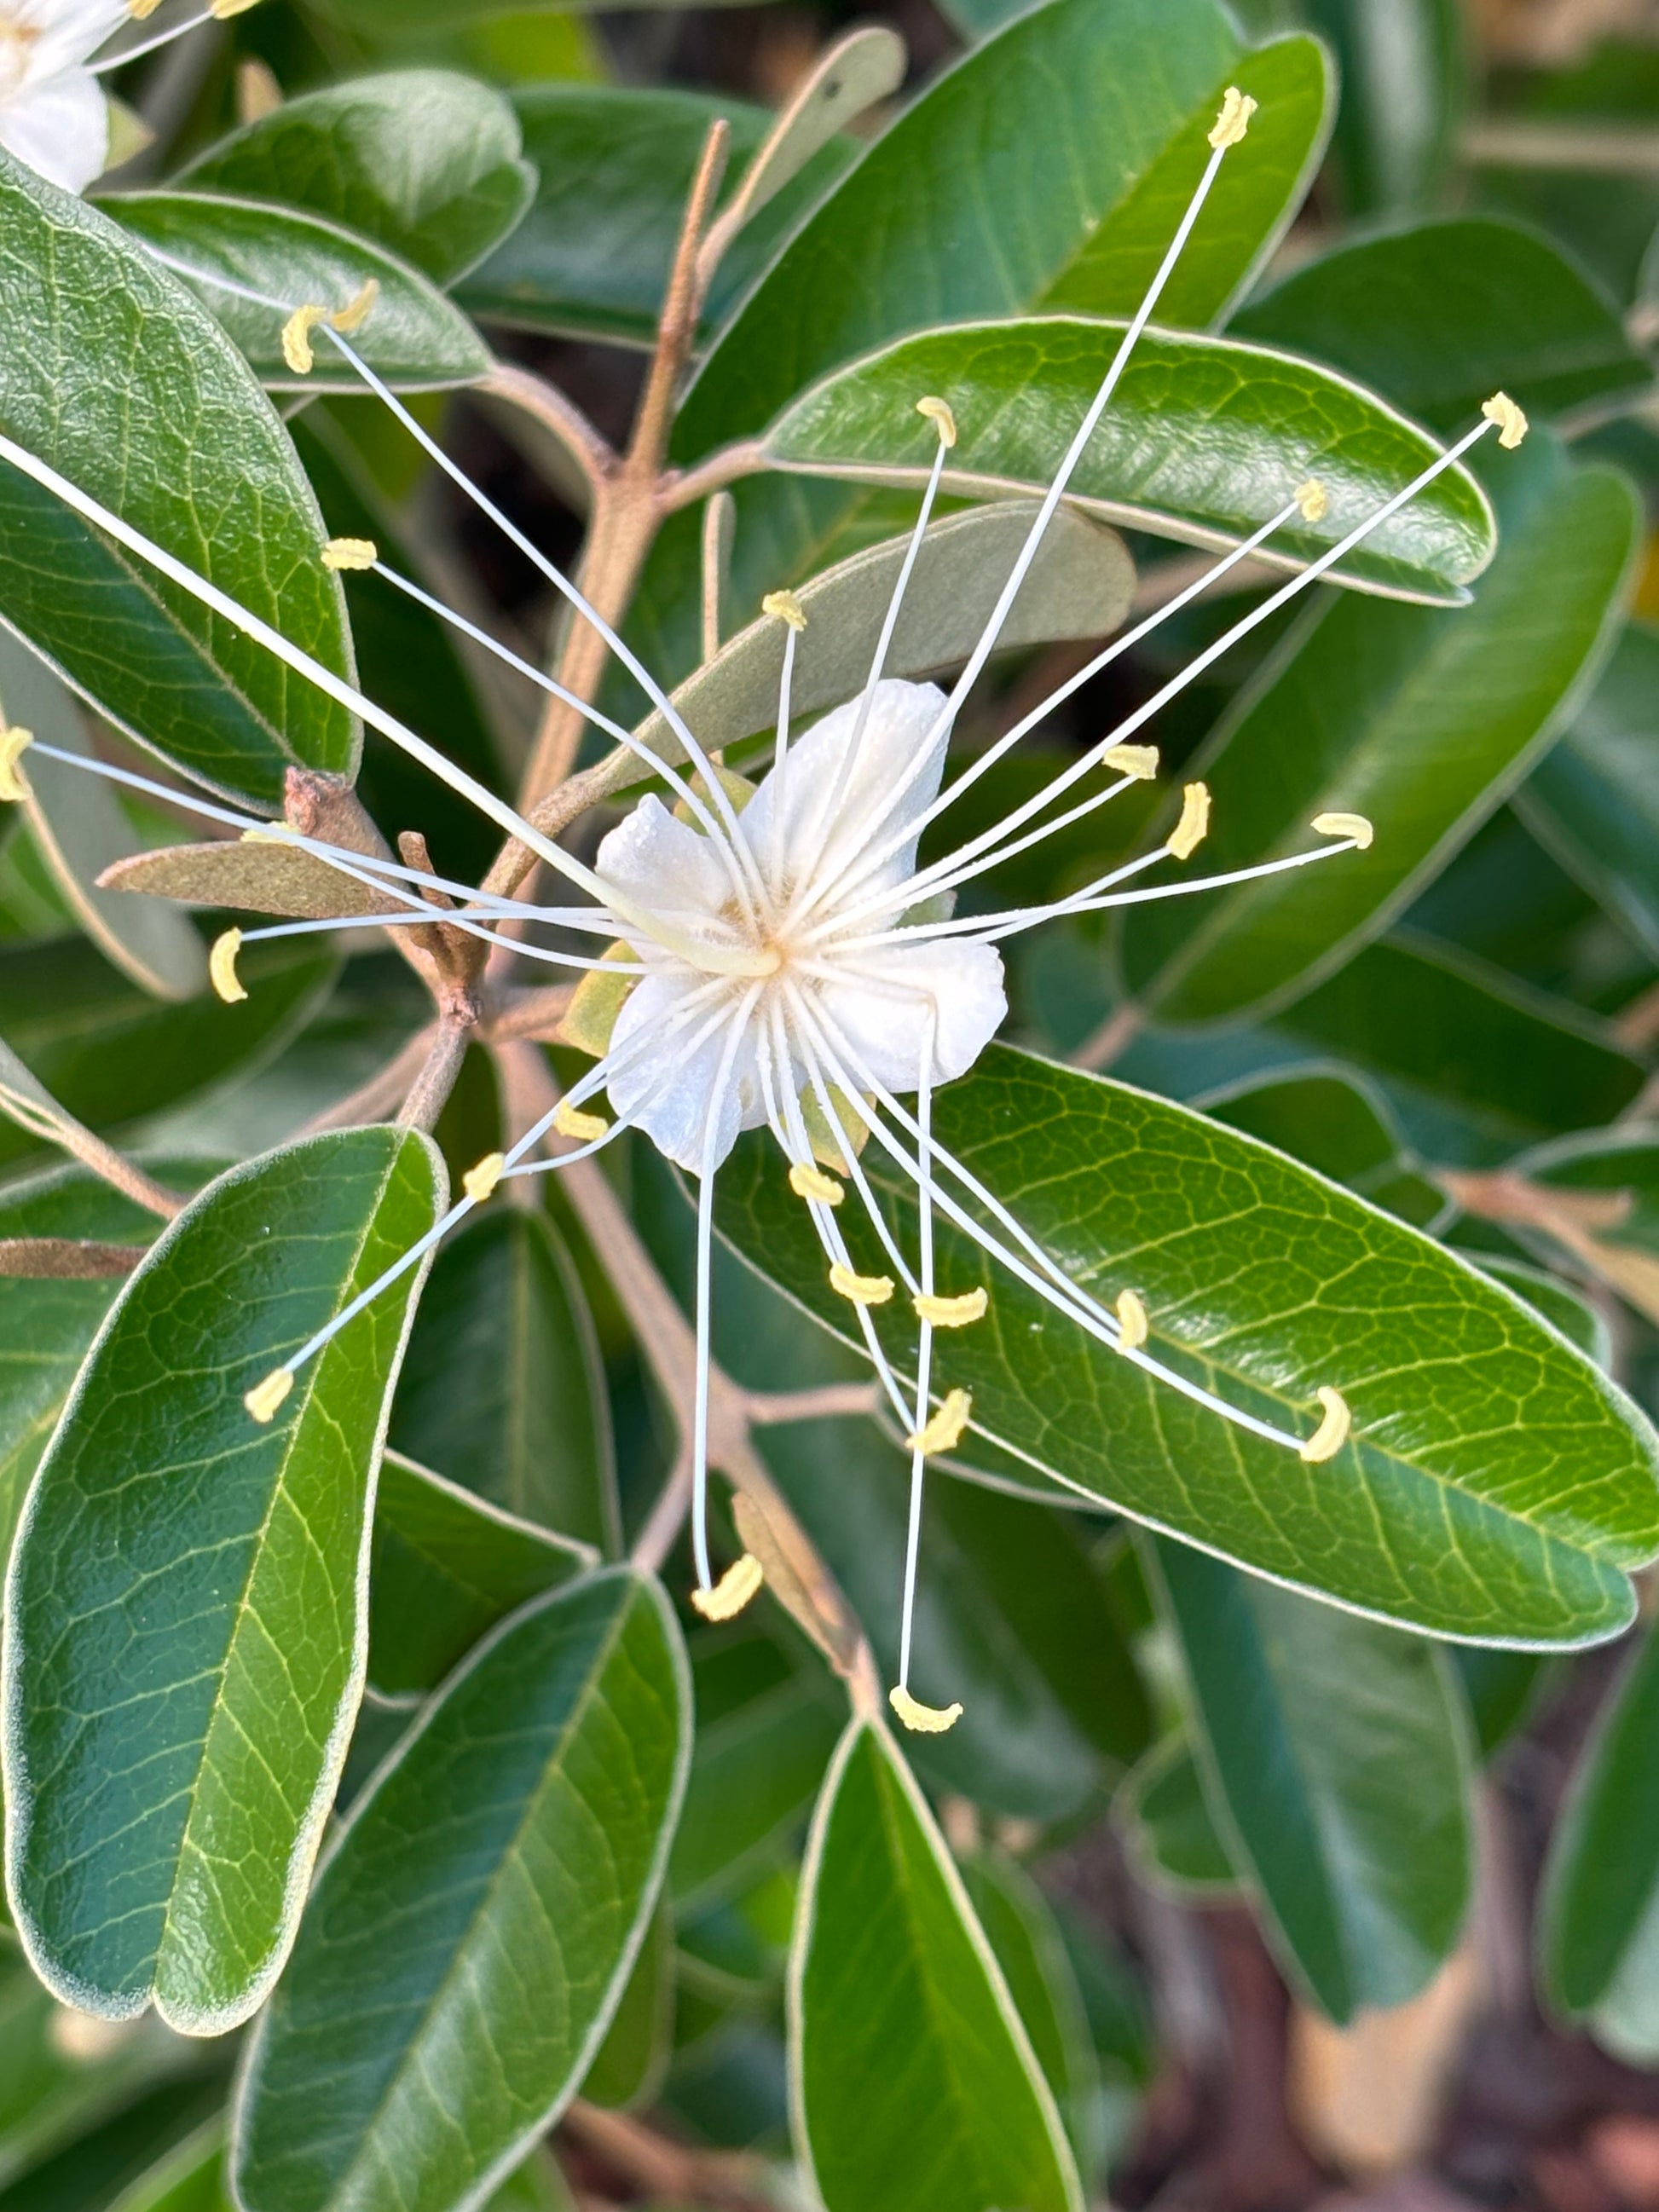 quadrella jamaicensis flower is the host plant for Great Southern White butterfly